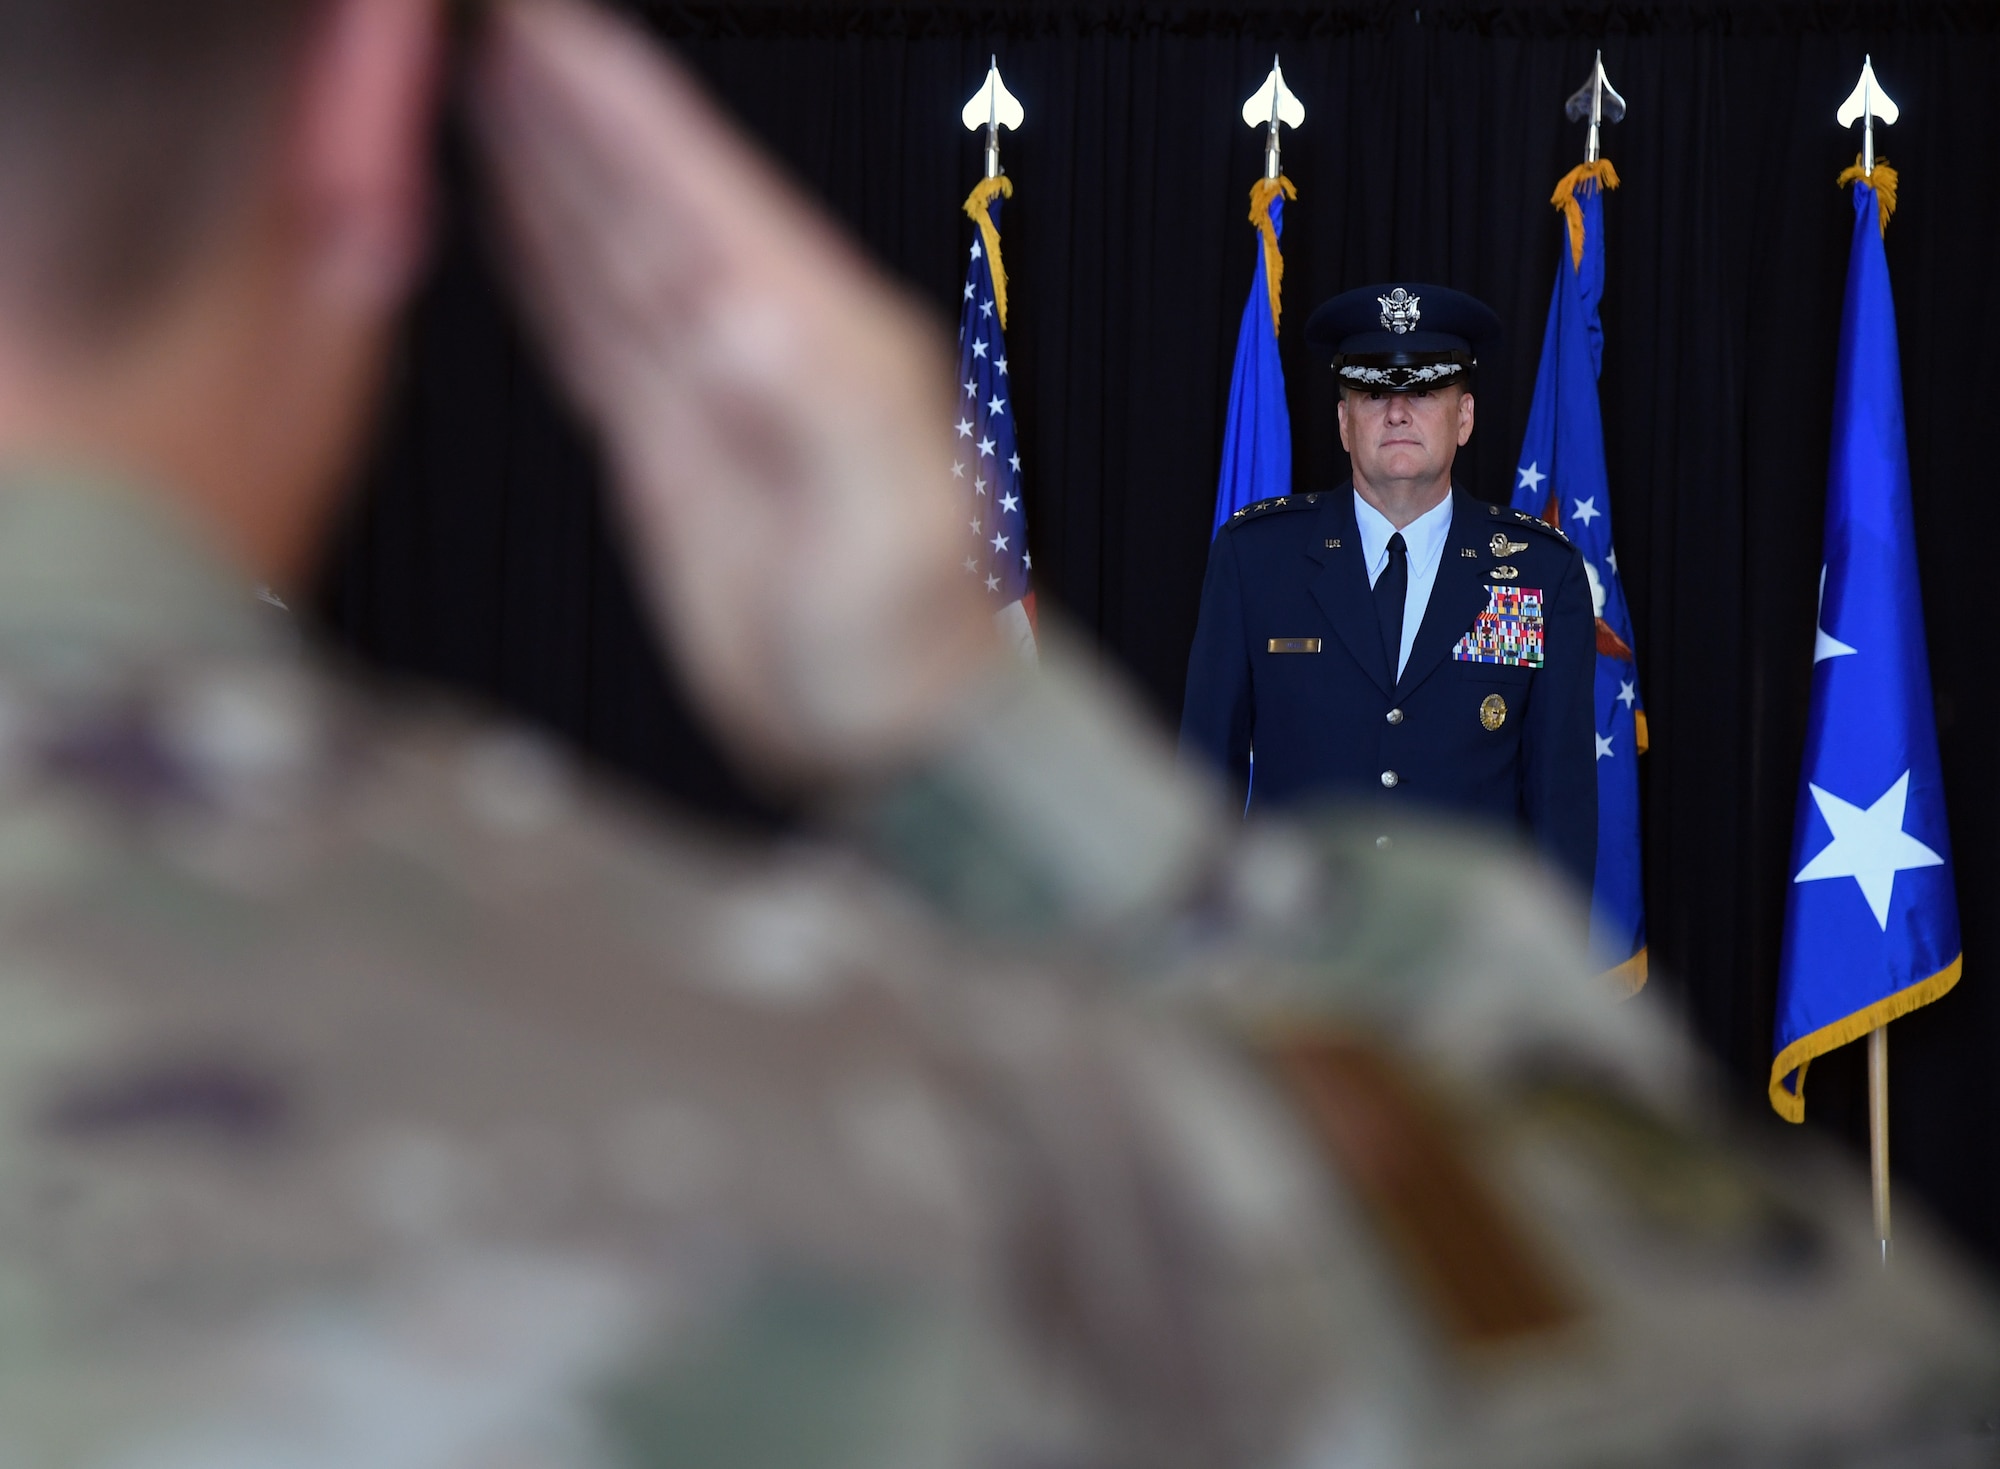 U.S. Air Force Lt. Gen. Brad Webb, commander of Air Education and Training Command, stands at attention during the Second Air Force change of command ceremony on Keesler Air Force Base,
Mississippi, Aug. 29, 2019. The ceremony is a symbol of command being exchanged from one commander to the next. Maj. Gen. Andrea Tullos assumed command of the Second Air Force from Maj. Gen. Timothy Leahy. (U.S. Air Force photo by Kemberly Groue)